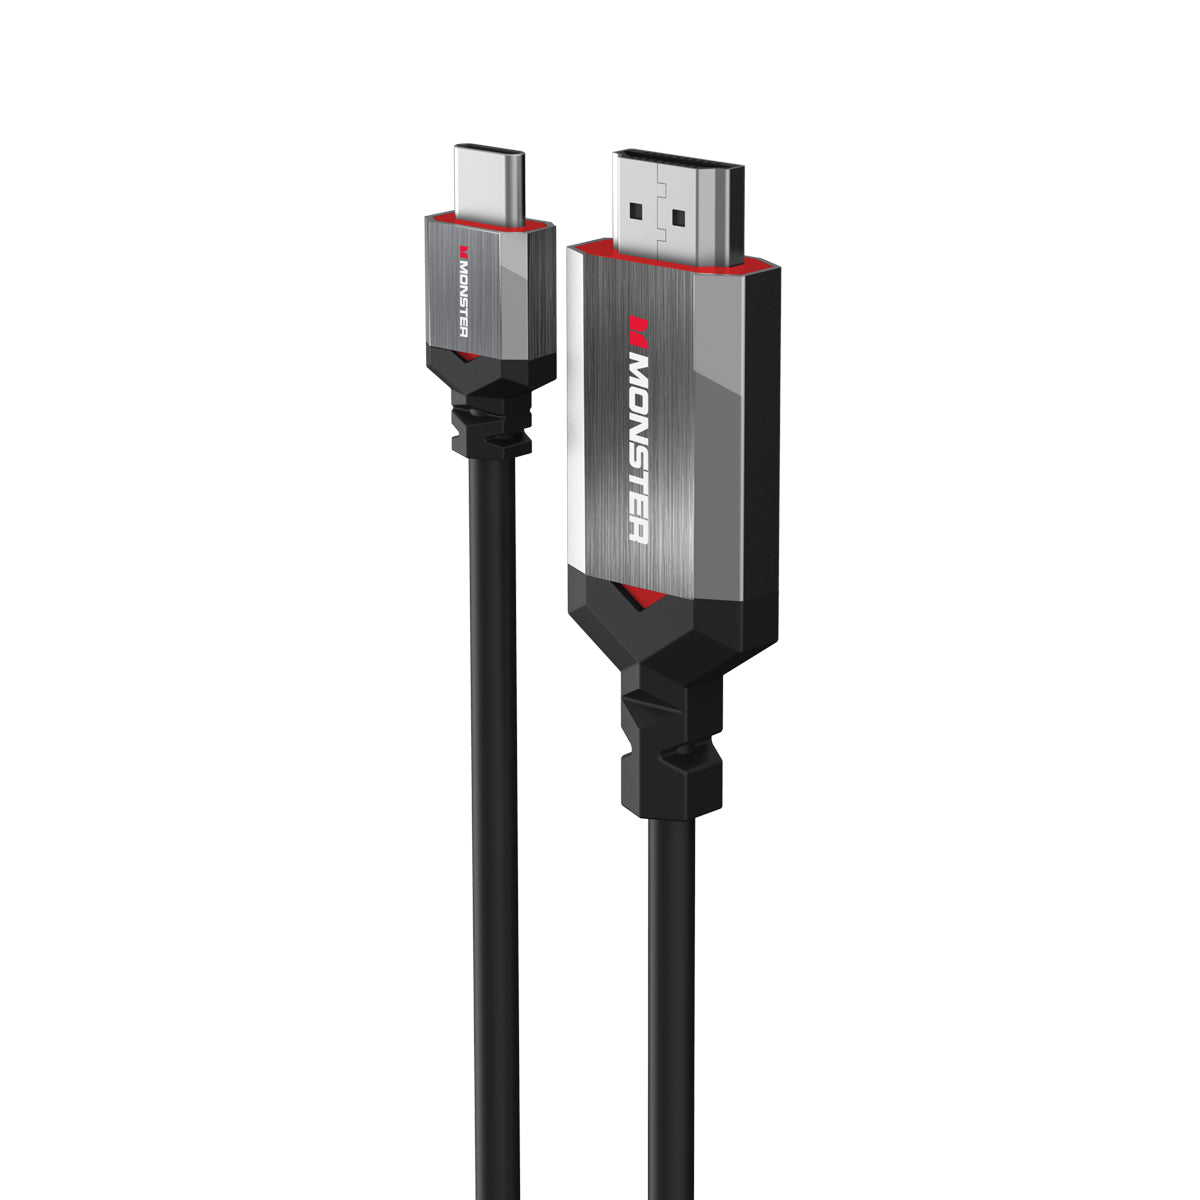 MONSTER ESSENTIALS G2 USB-C to HDMI 4K@30Hz 2M Cable